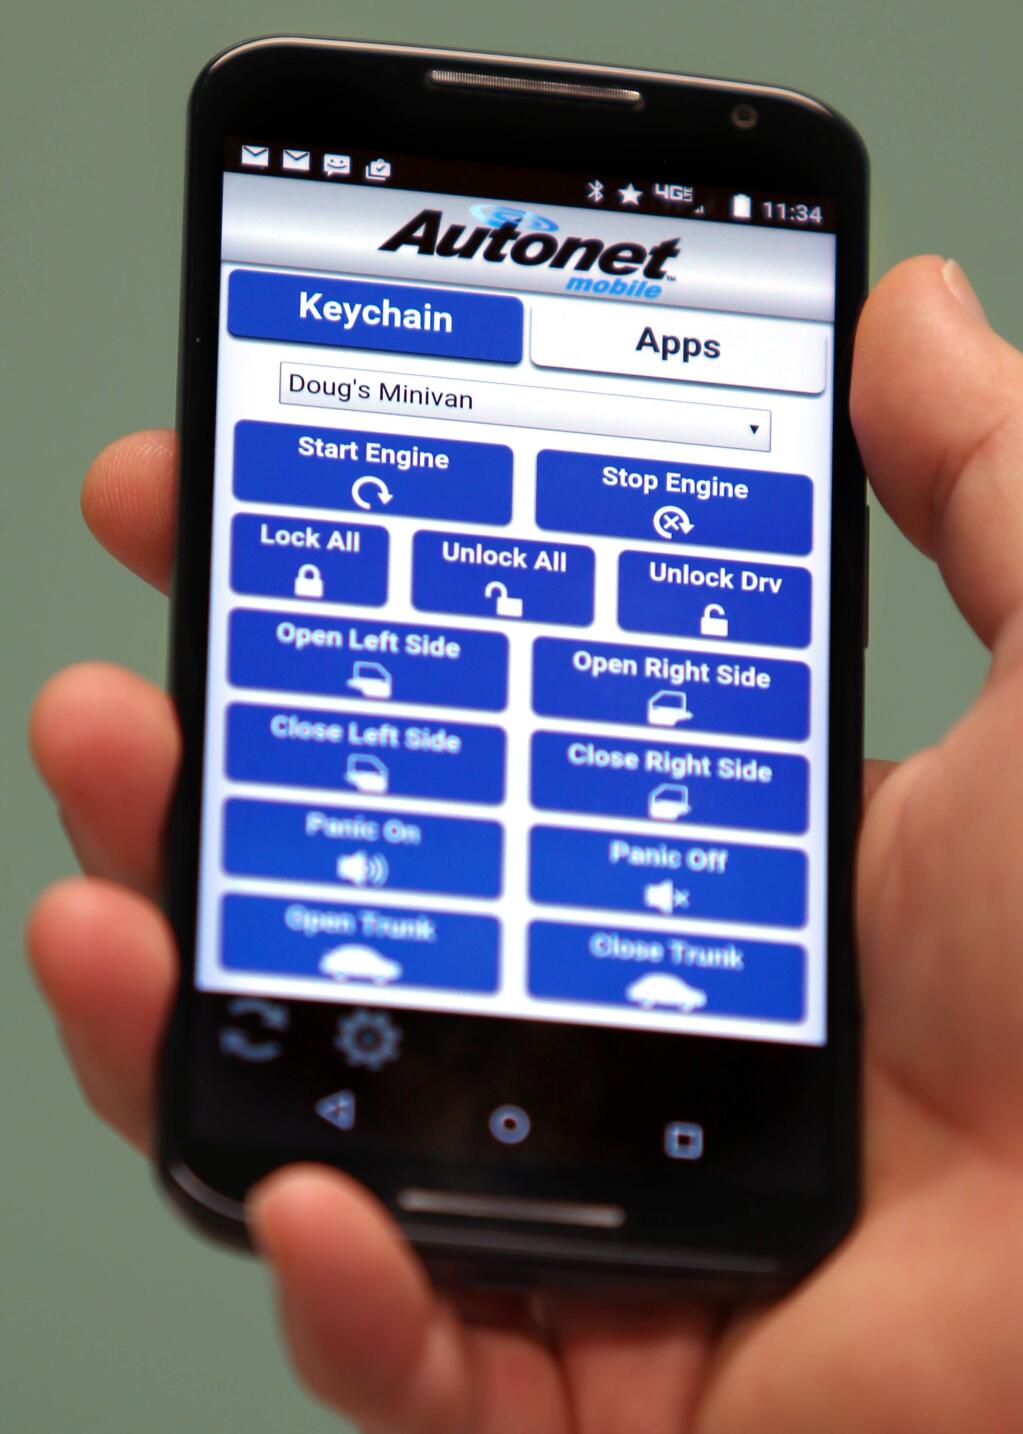 The Autonet Mobile software and device allows drivers to send commands to their cars from their smartphones, as well as retrieve data from their vehicles.(Christopher Chung/ The Press Democrat)